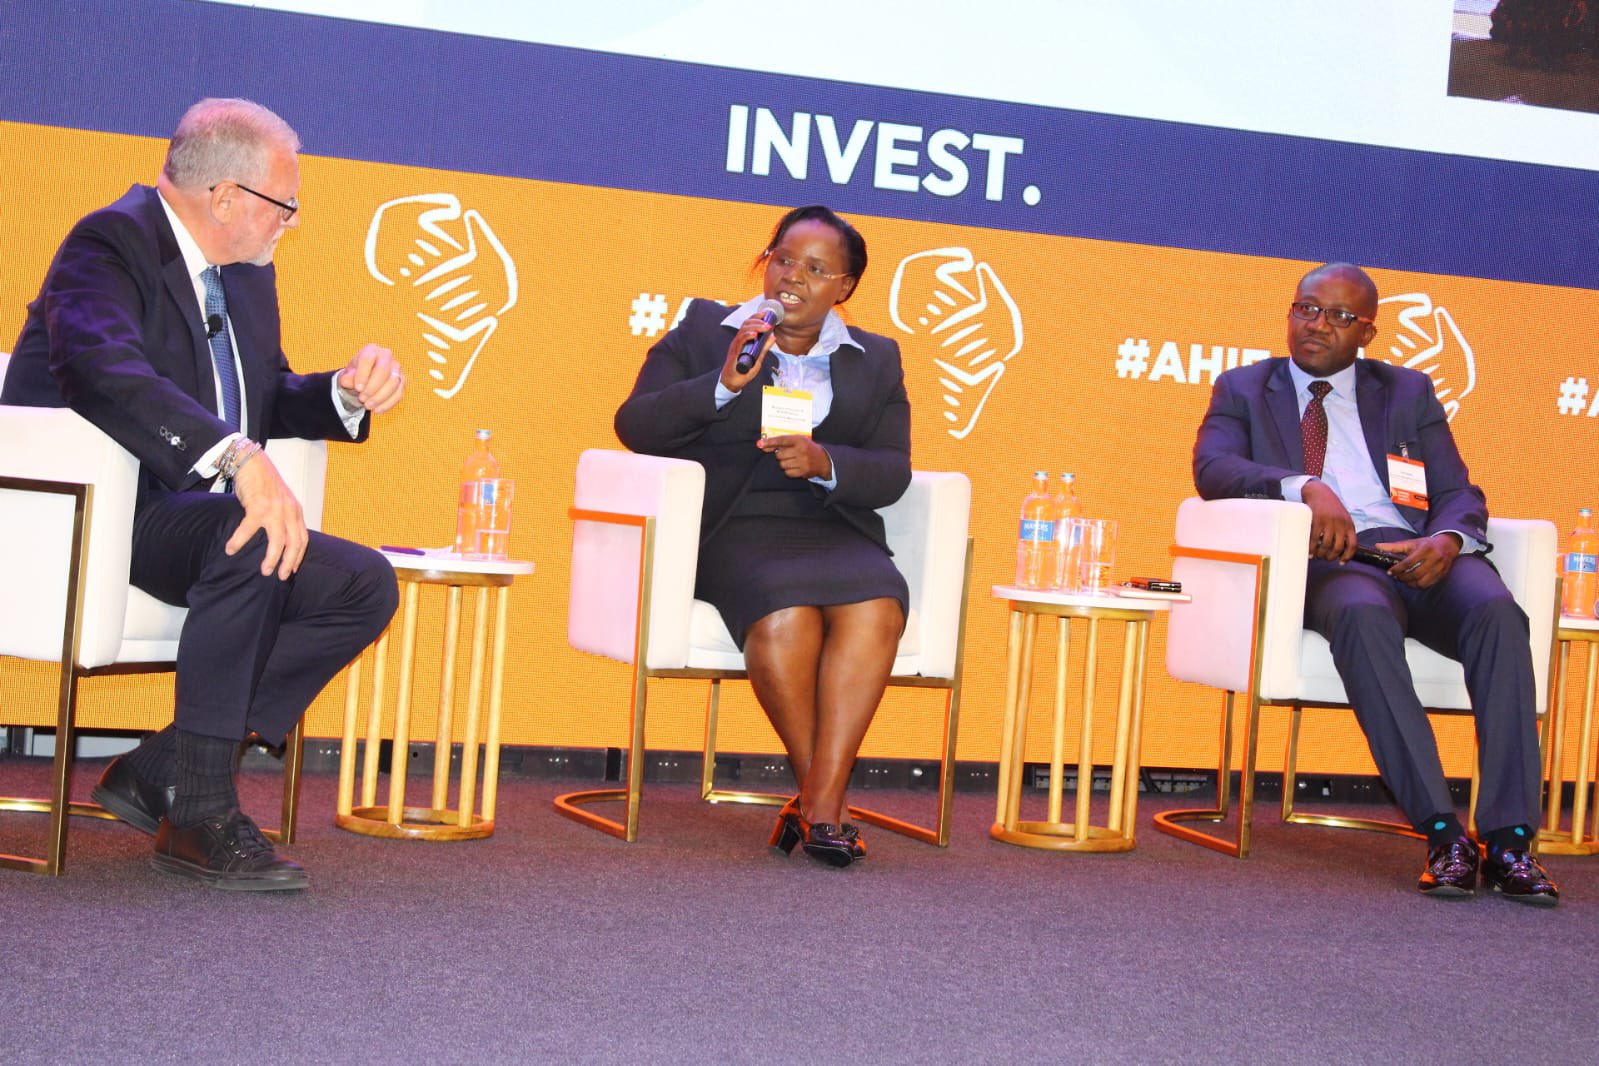 Cabinet Secretary, Ministry of Tourism, Wildlife and Heritage ,Peninah Malonza engaging in a panel discussion during the 11th edition of the annual Africa Hospitality Investment Forum (AHIF), in Nairobi.